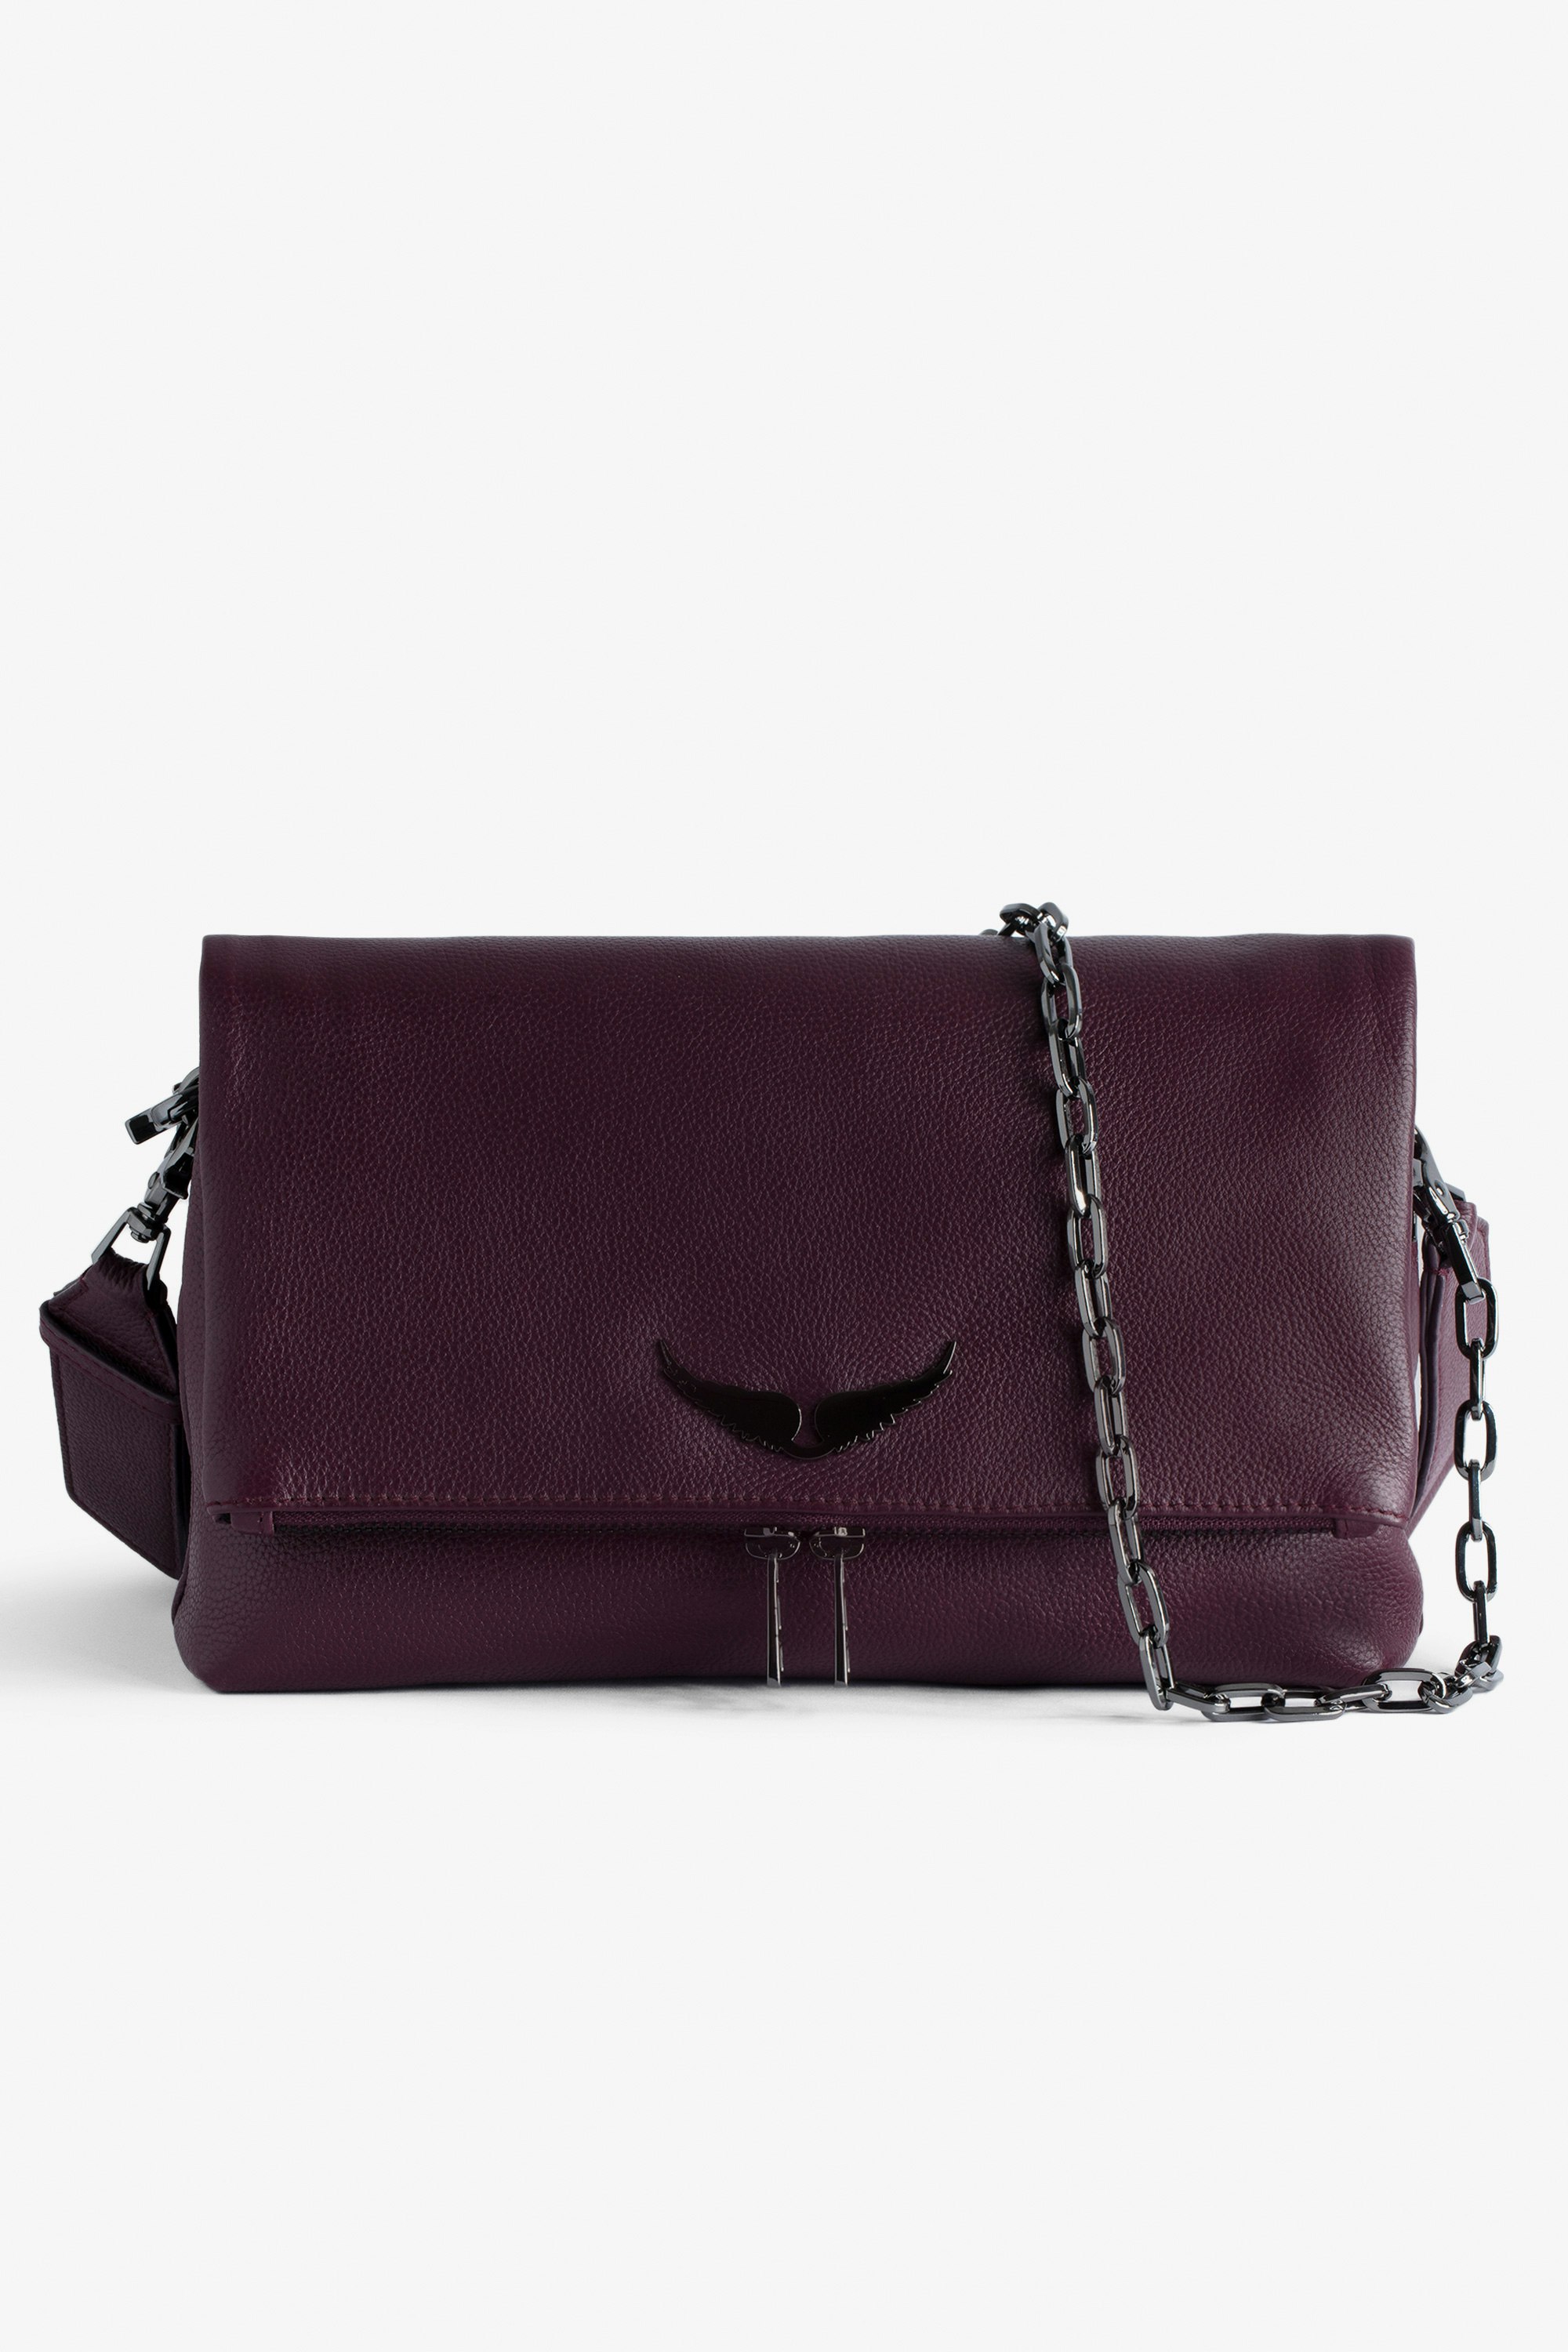 Rocky Bag - Women’s burgundy grained leather bag with shoulder strap and wings charm